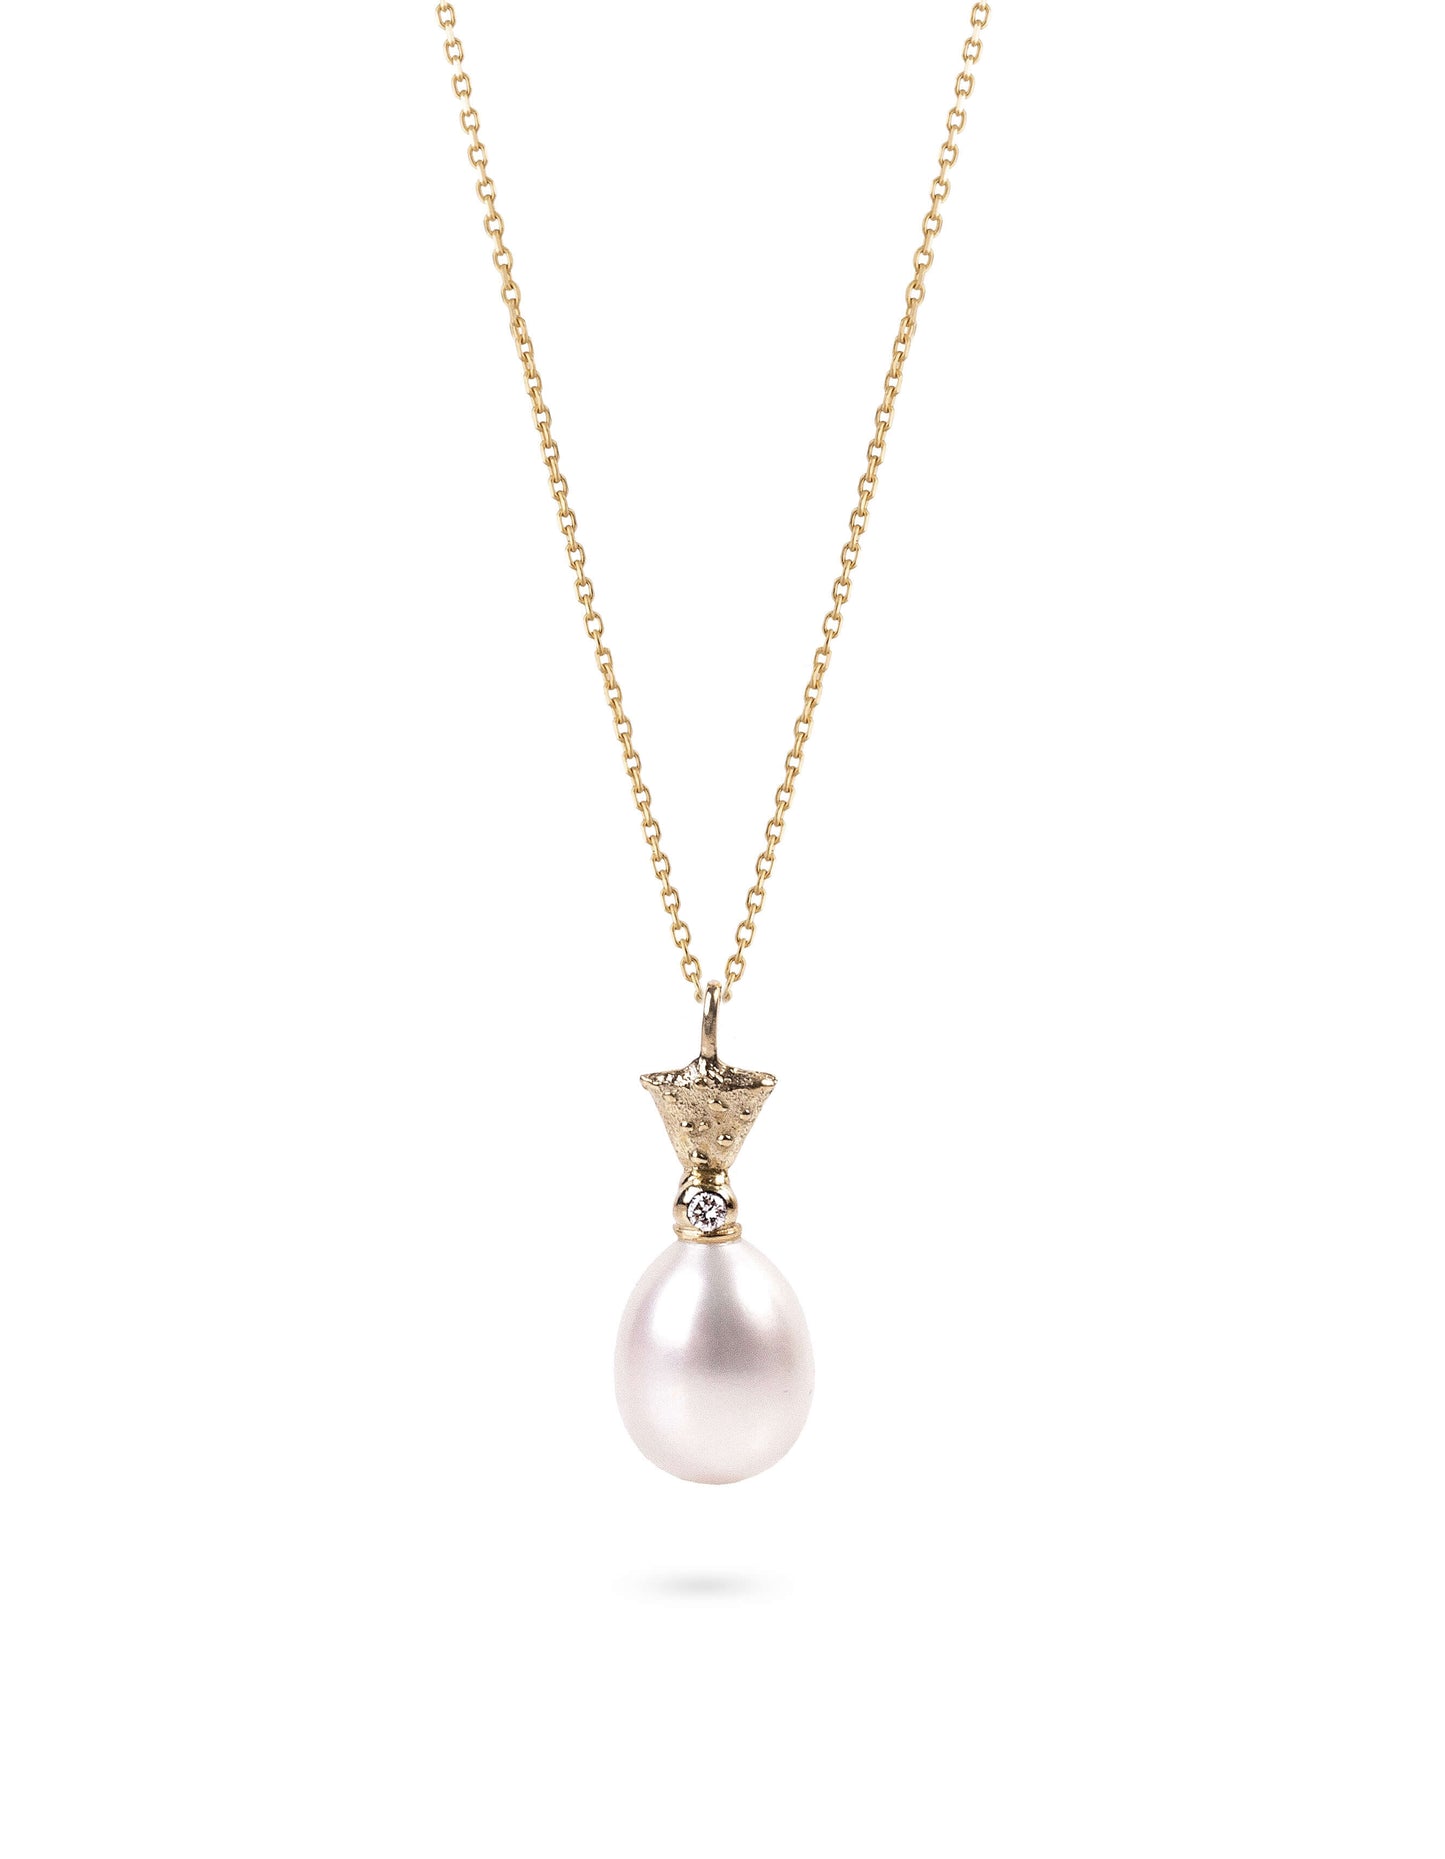 Necklace - Lily with White Pearl